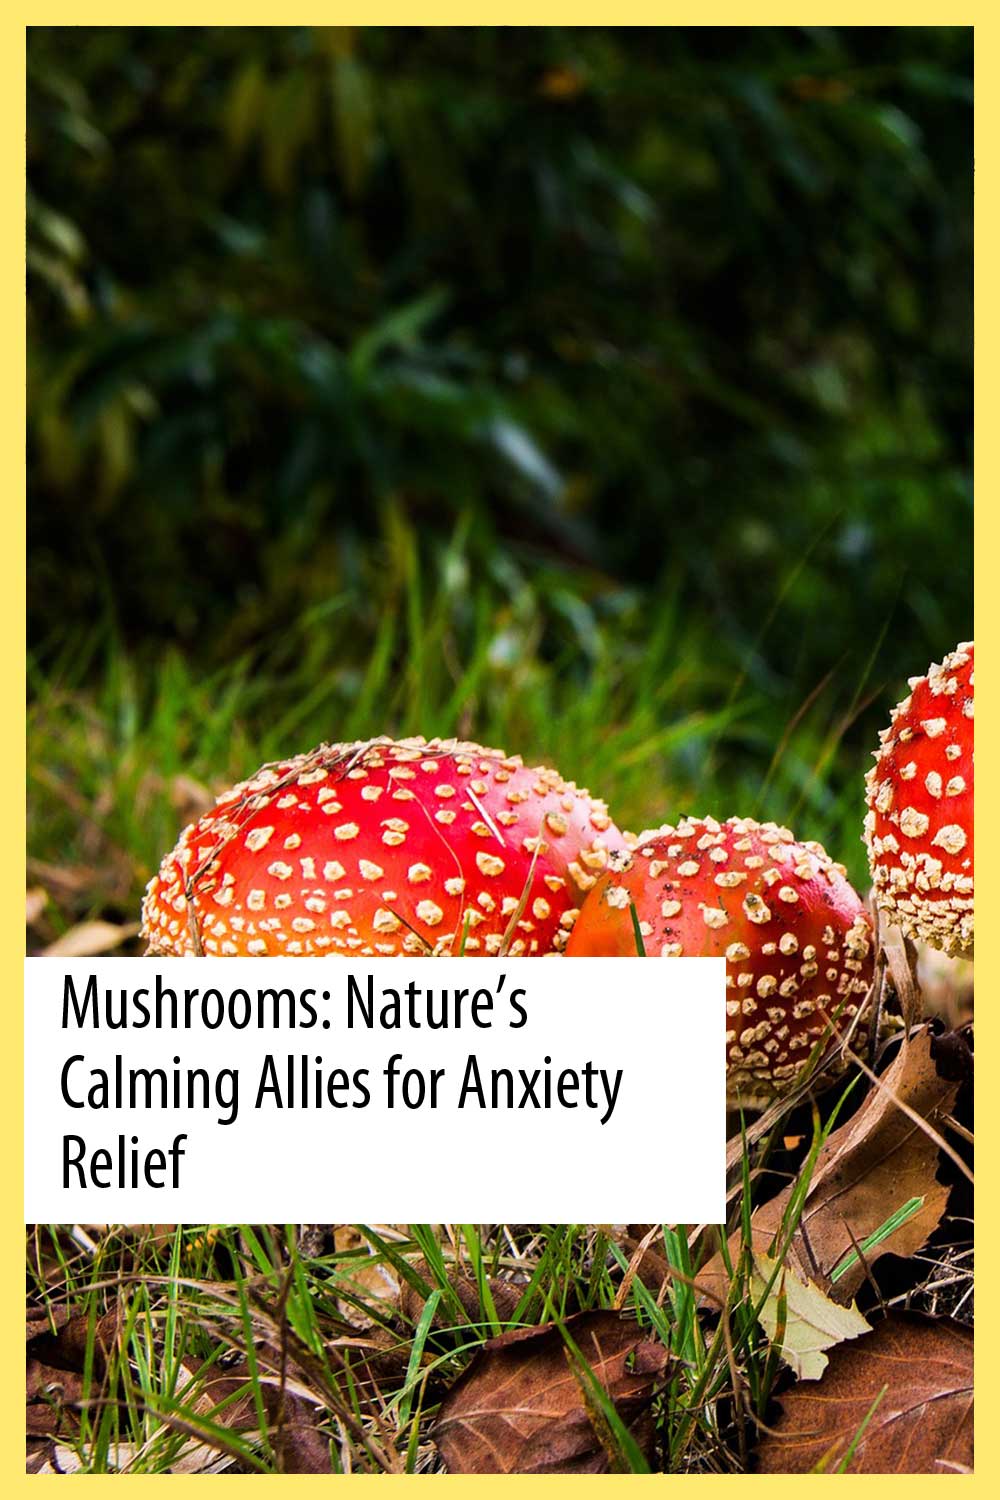 Mushrooms: Nature’s Calming Allies for Anxiety Relief